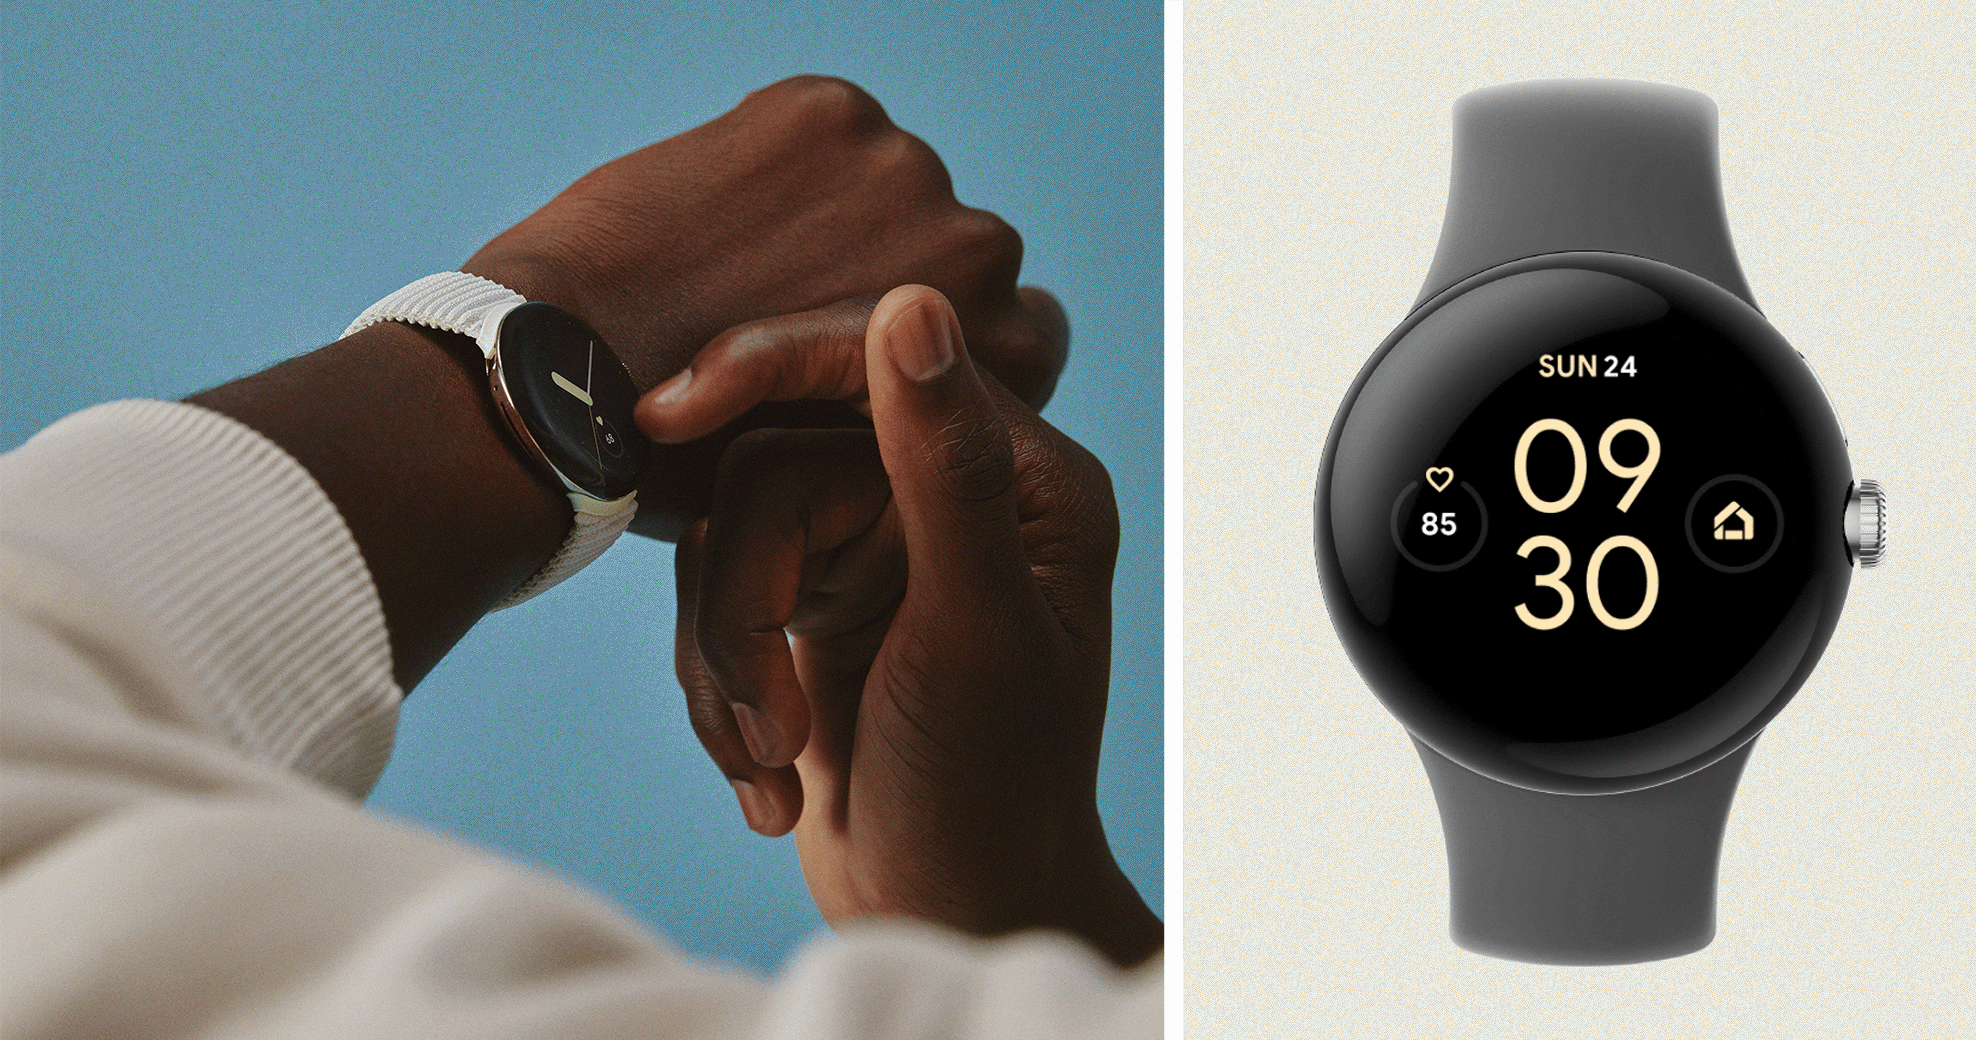 Two images. On the left is a person's wrist with the Google Pixel Watch. One the right is a GIF of the watch's interface.